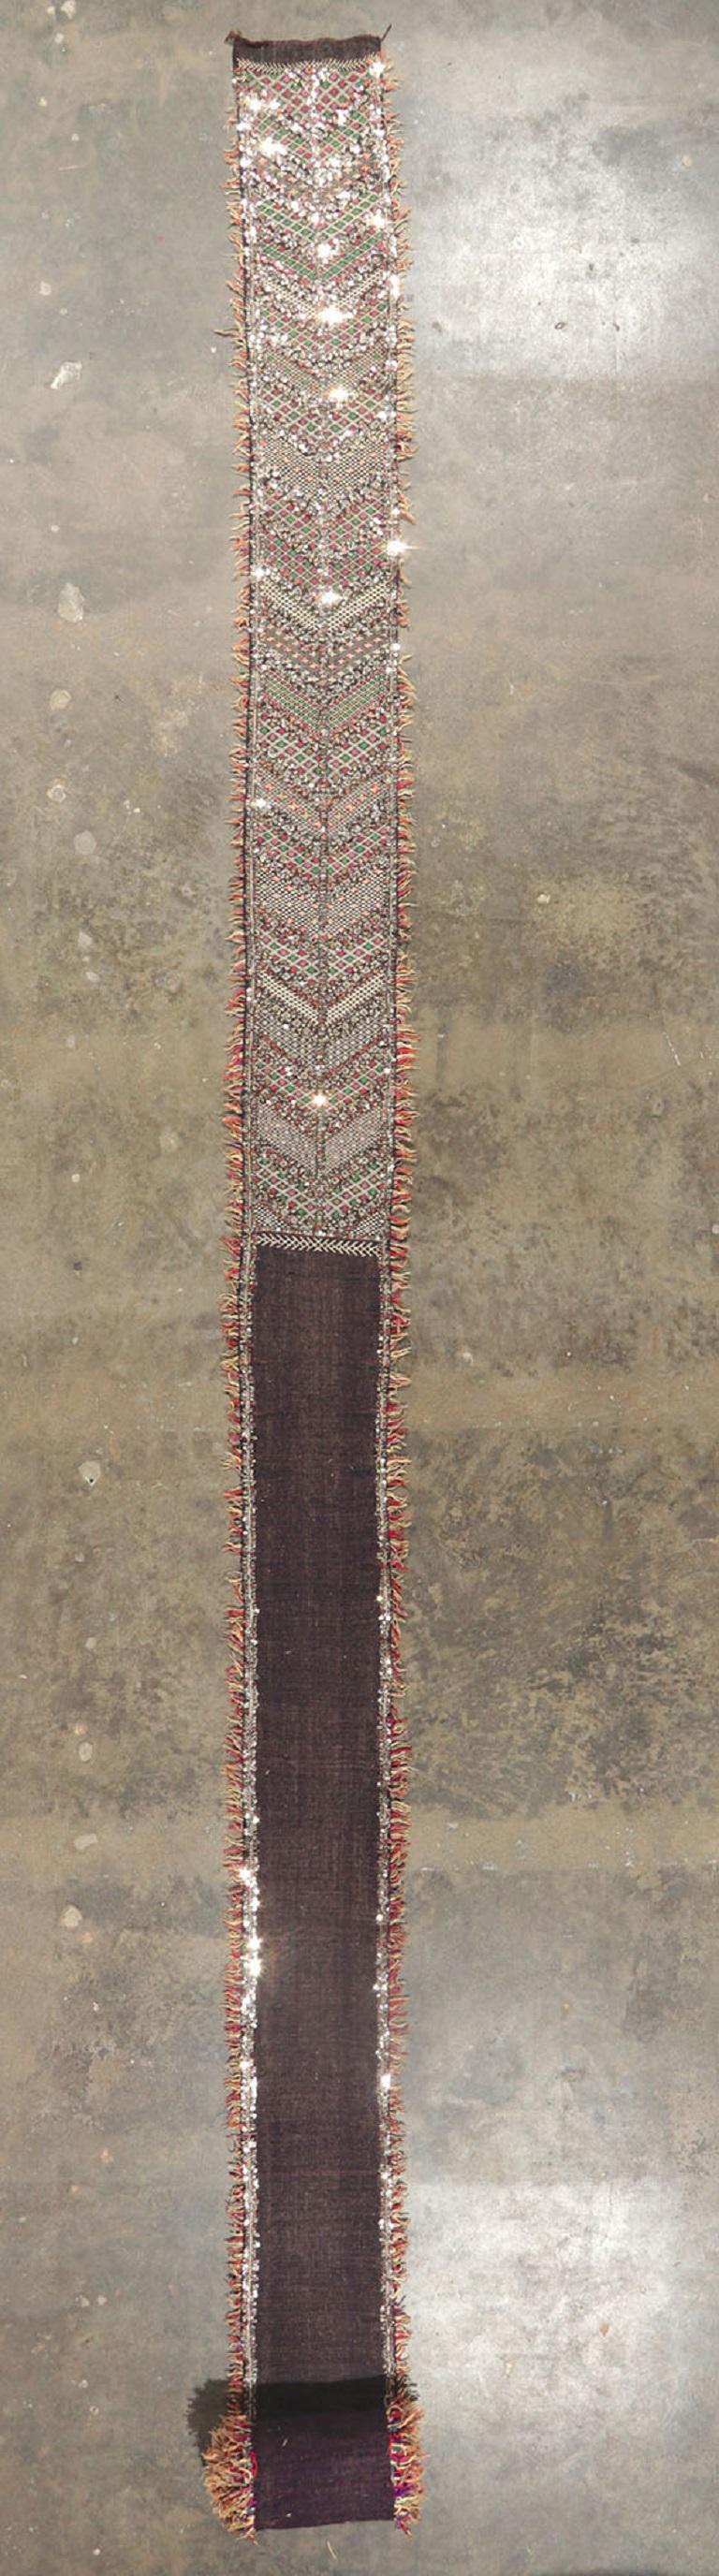 Vintage Berber Moroccan Sequined Kilim Rug - Wedding Aisle Runner In Distressed Condition For Sale In Dallas, TX